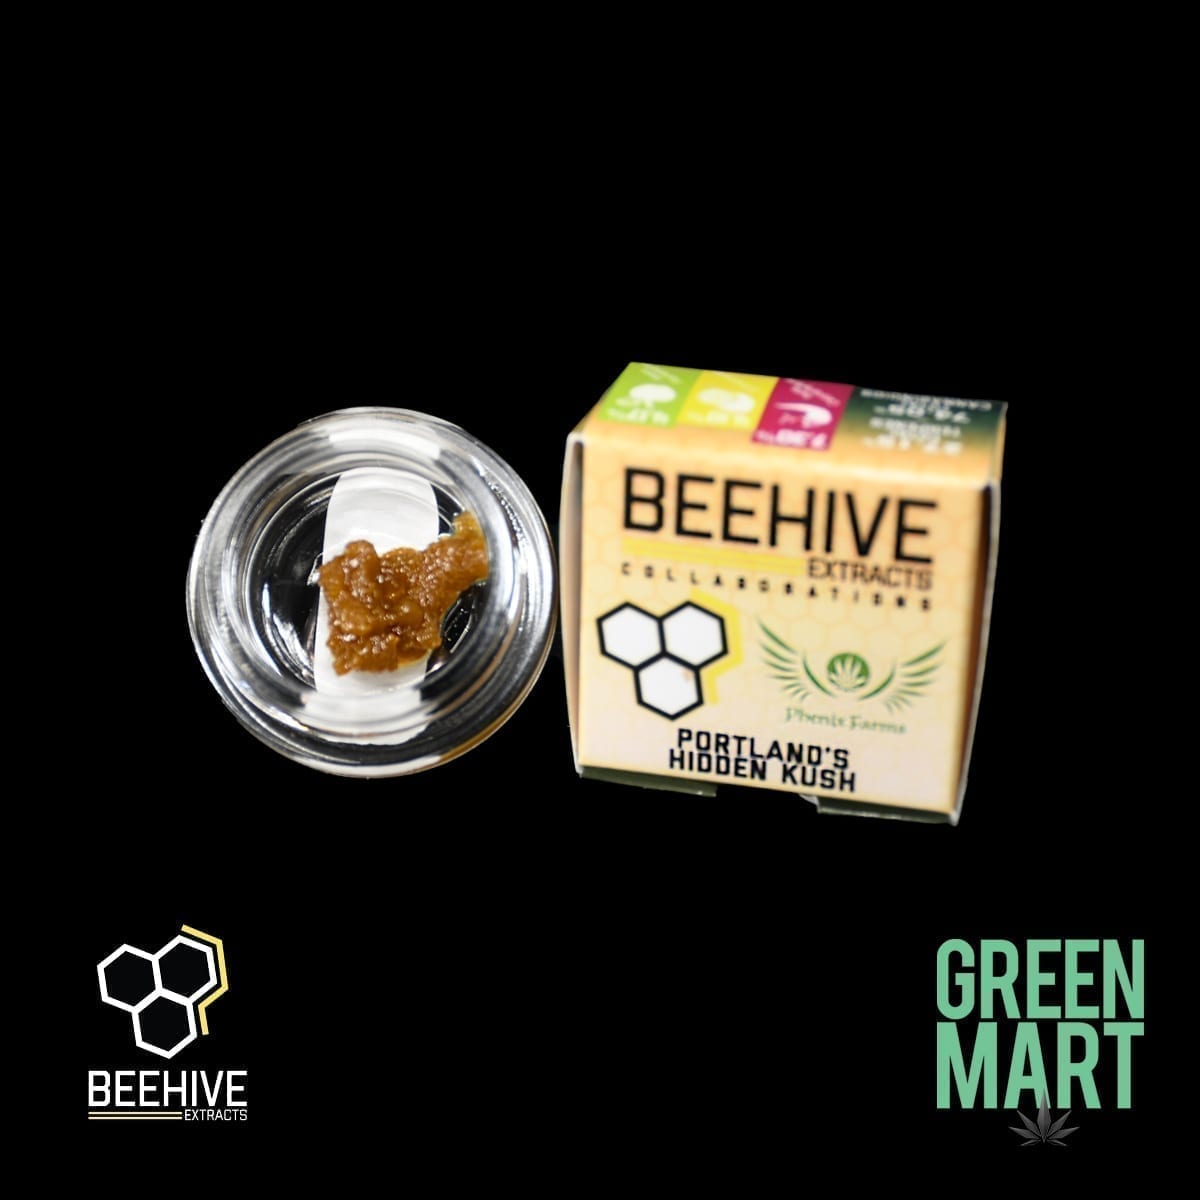 Beehive Extracts - Portland's Hidden Kush Front